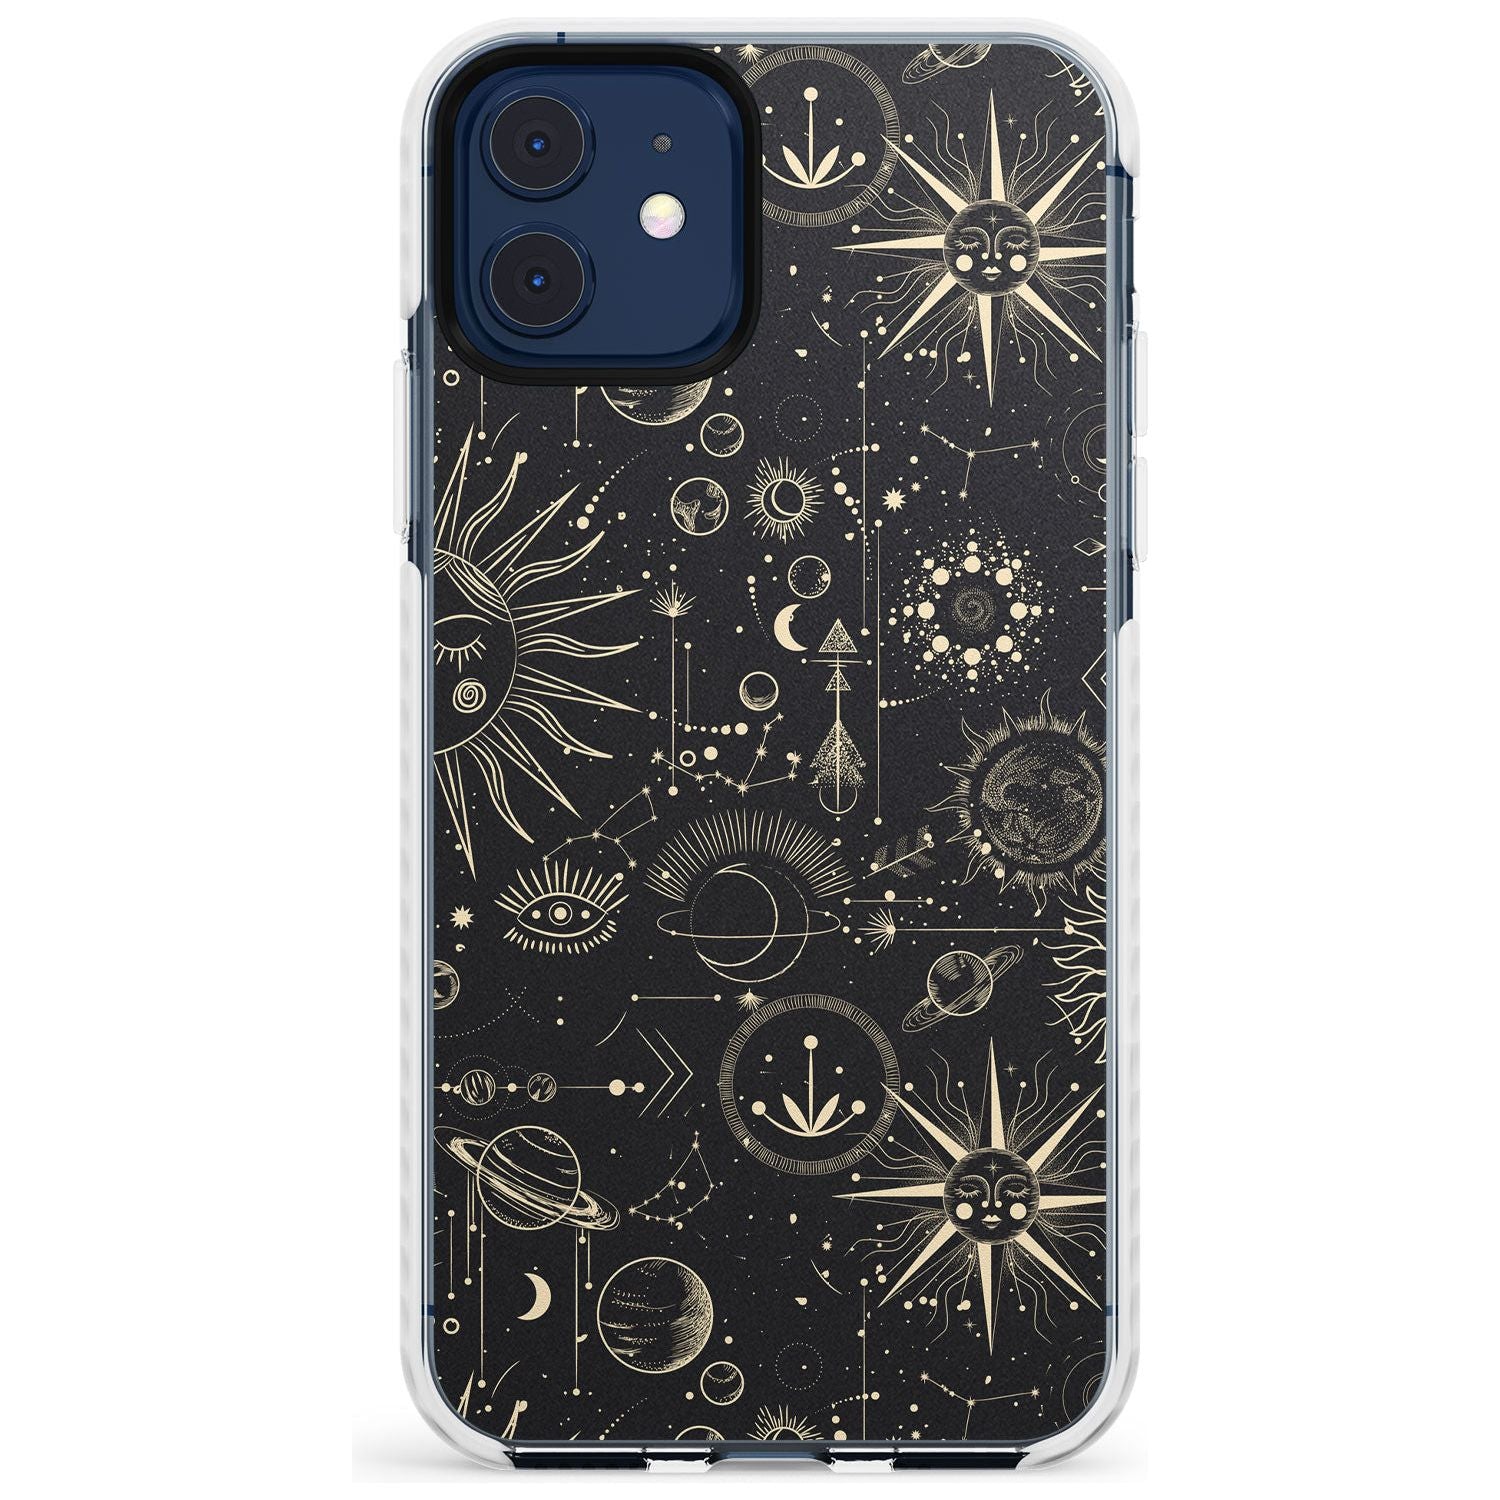 Suns & Planets Slim TPU Phone Case for iPhone 11